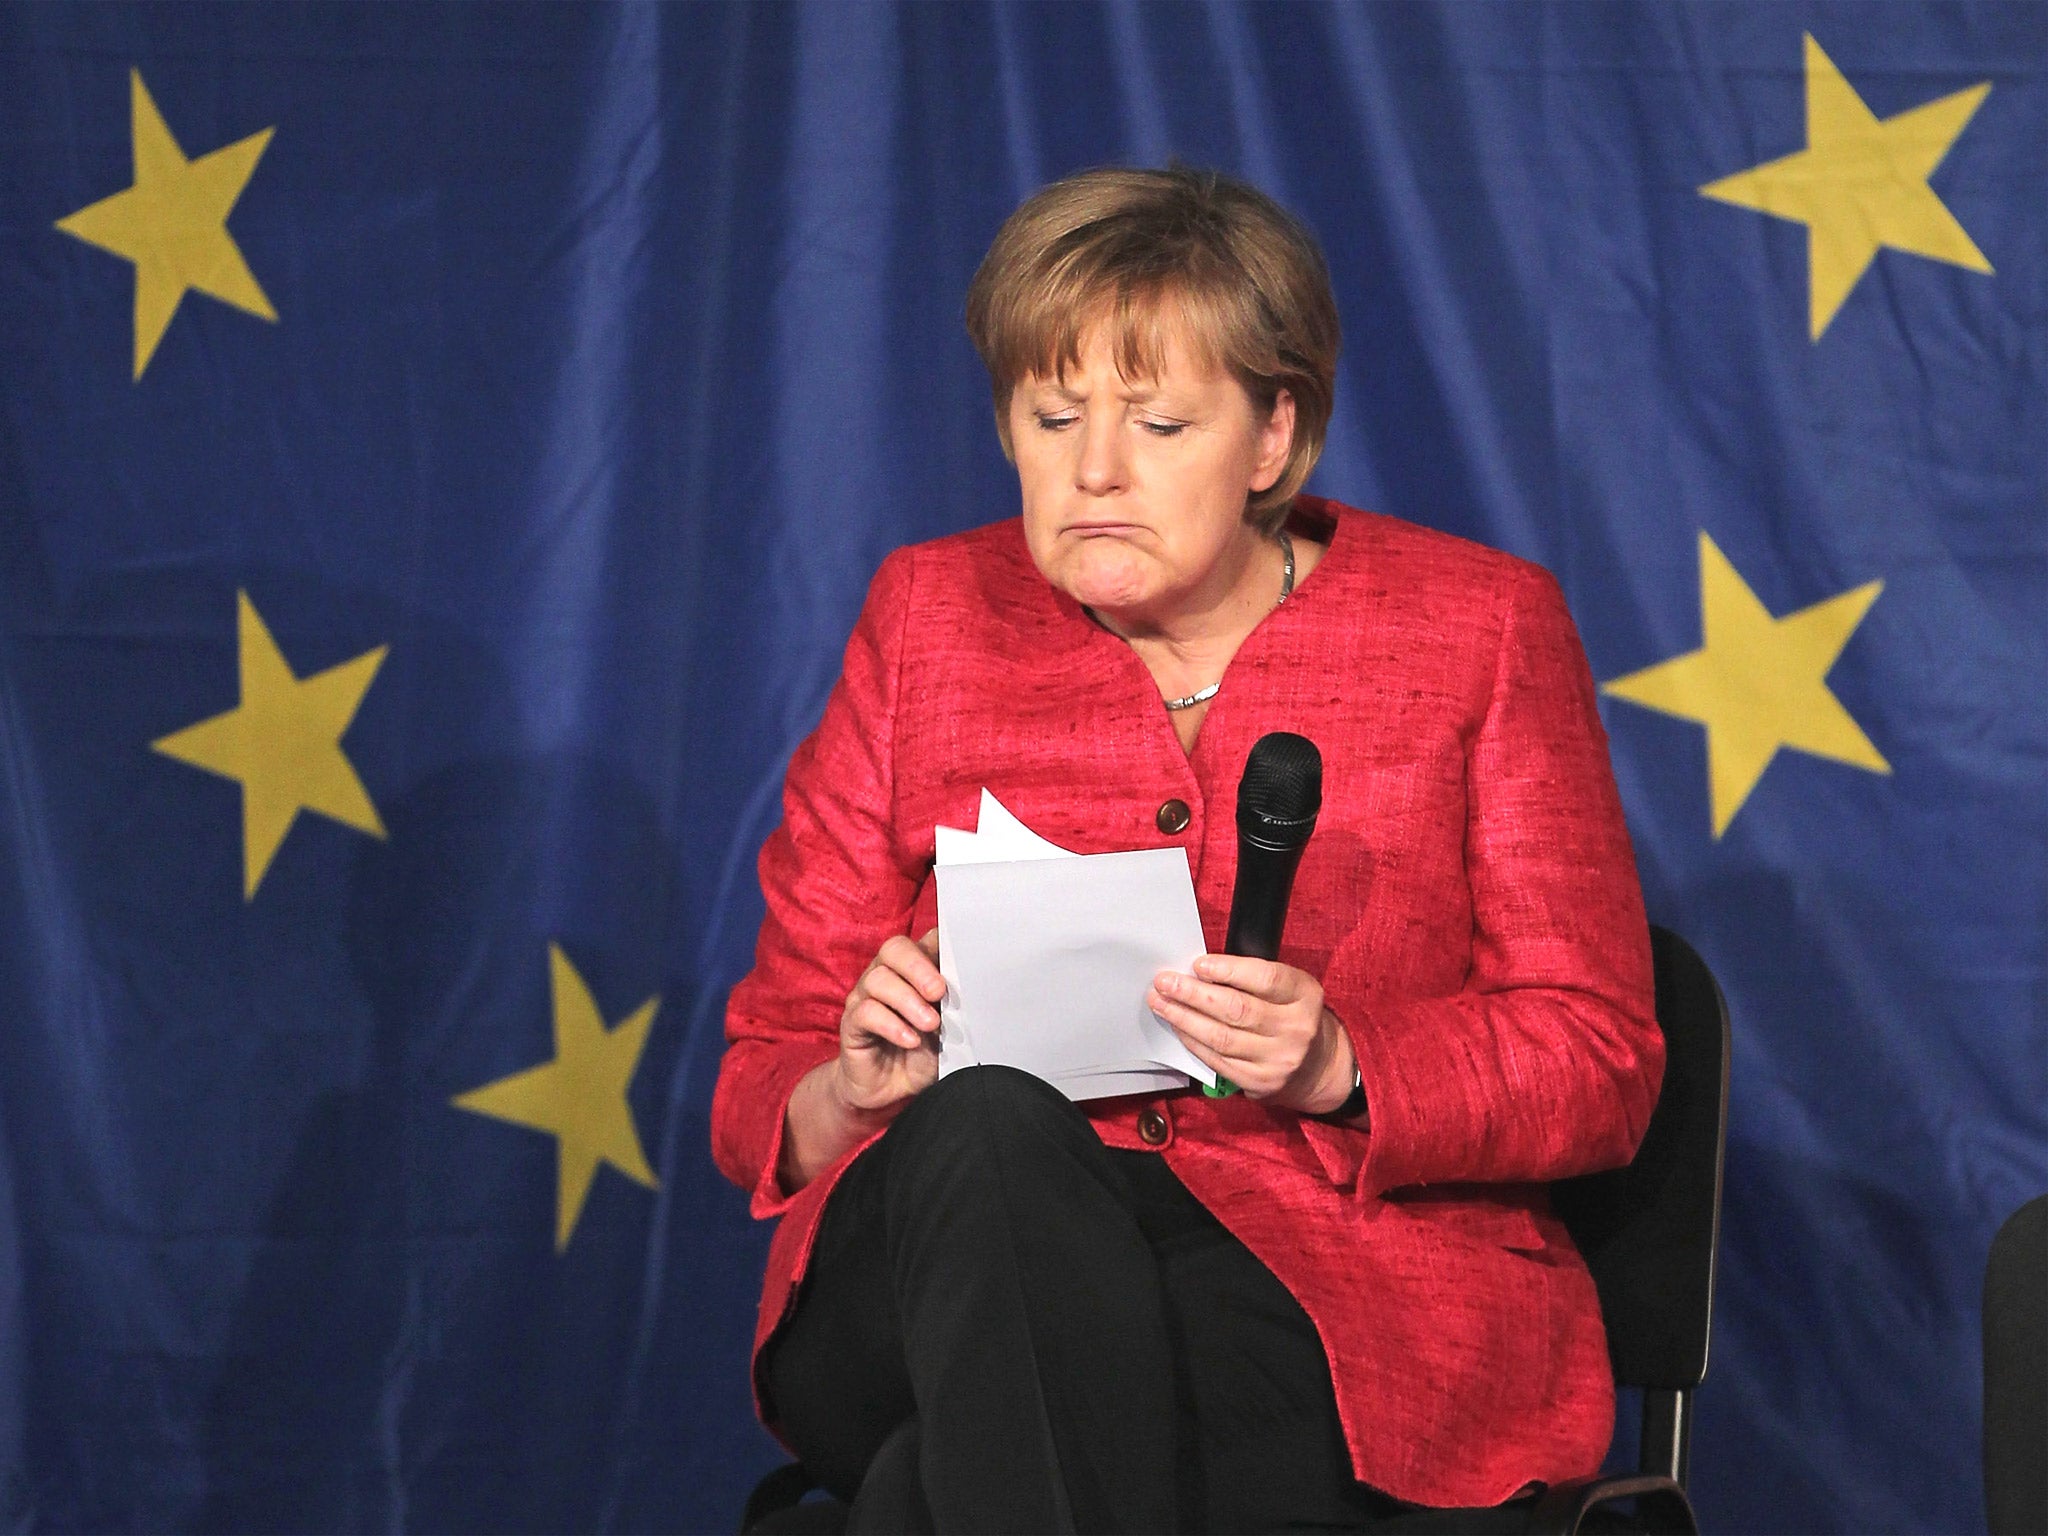 Angela Merkel is expected to stress Britain’s importance within the European Union